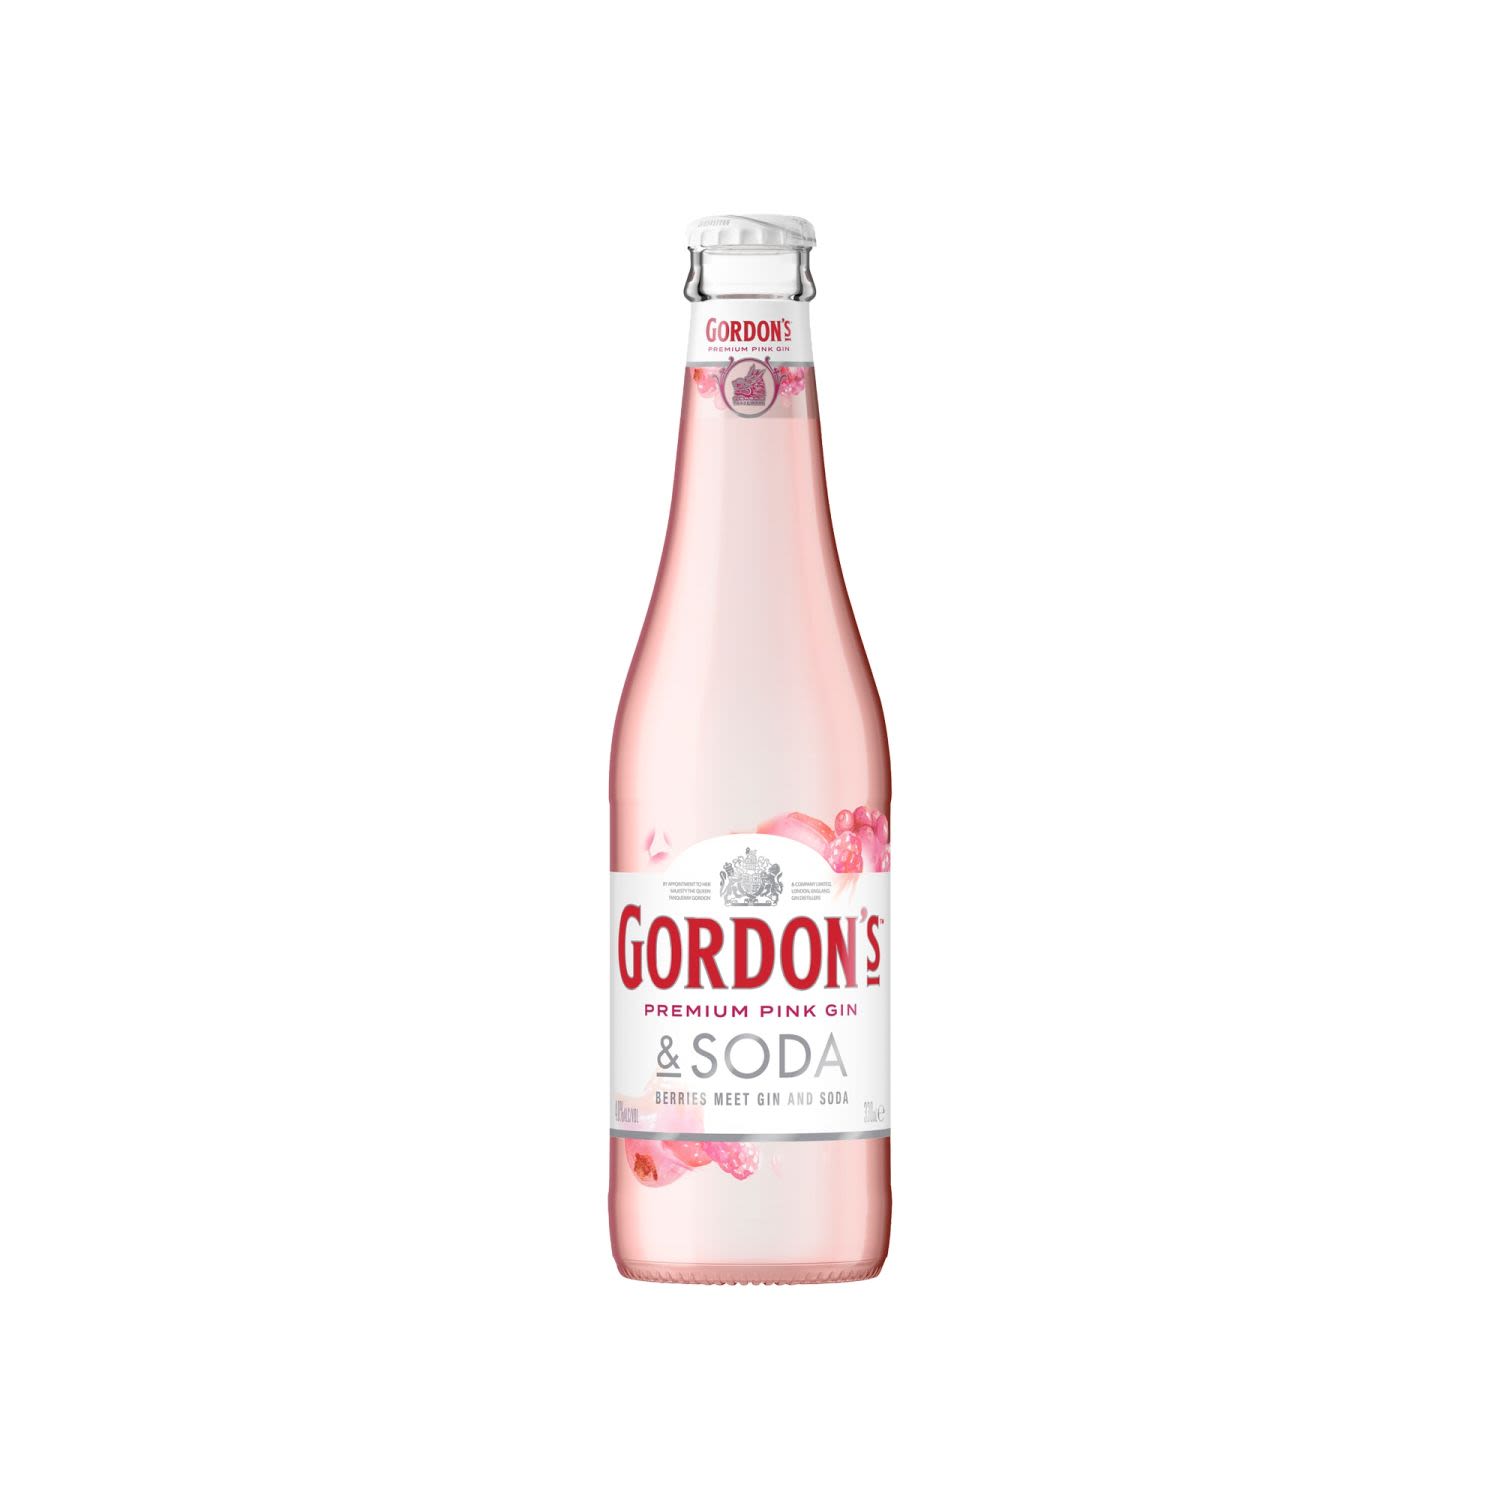 Gordon's Pink Gin and Soda Bottles 330mL - Gordon's Premium Pink Distilled Gin has been created to offer a sweeter and more accessible way to enjoy a gin. Crafted to balance the refreshing taste of Gordon's with the sweetness of raspberries and strawberries with the tang of redcurrant. Made using only the highest quality ingredients and only natural flavourings to provide an authentic real berry flavour.<br /> <br />Alcohol Volume: 4.00%<br /><br />Pack Format: Bottle<br /><br />Standard Drinks: 1</br /><br />Pack Type: Bottle<br />